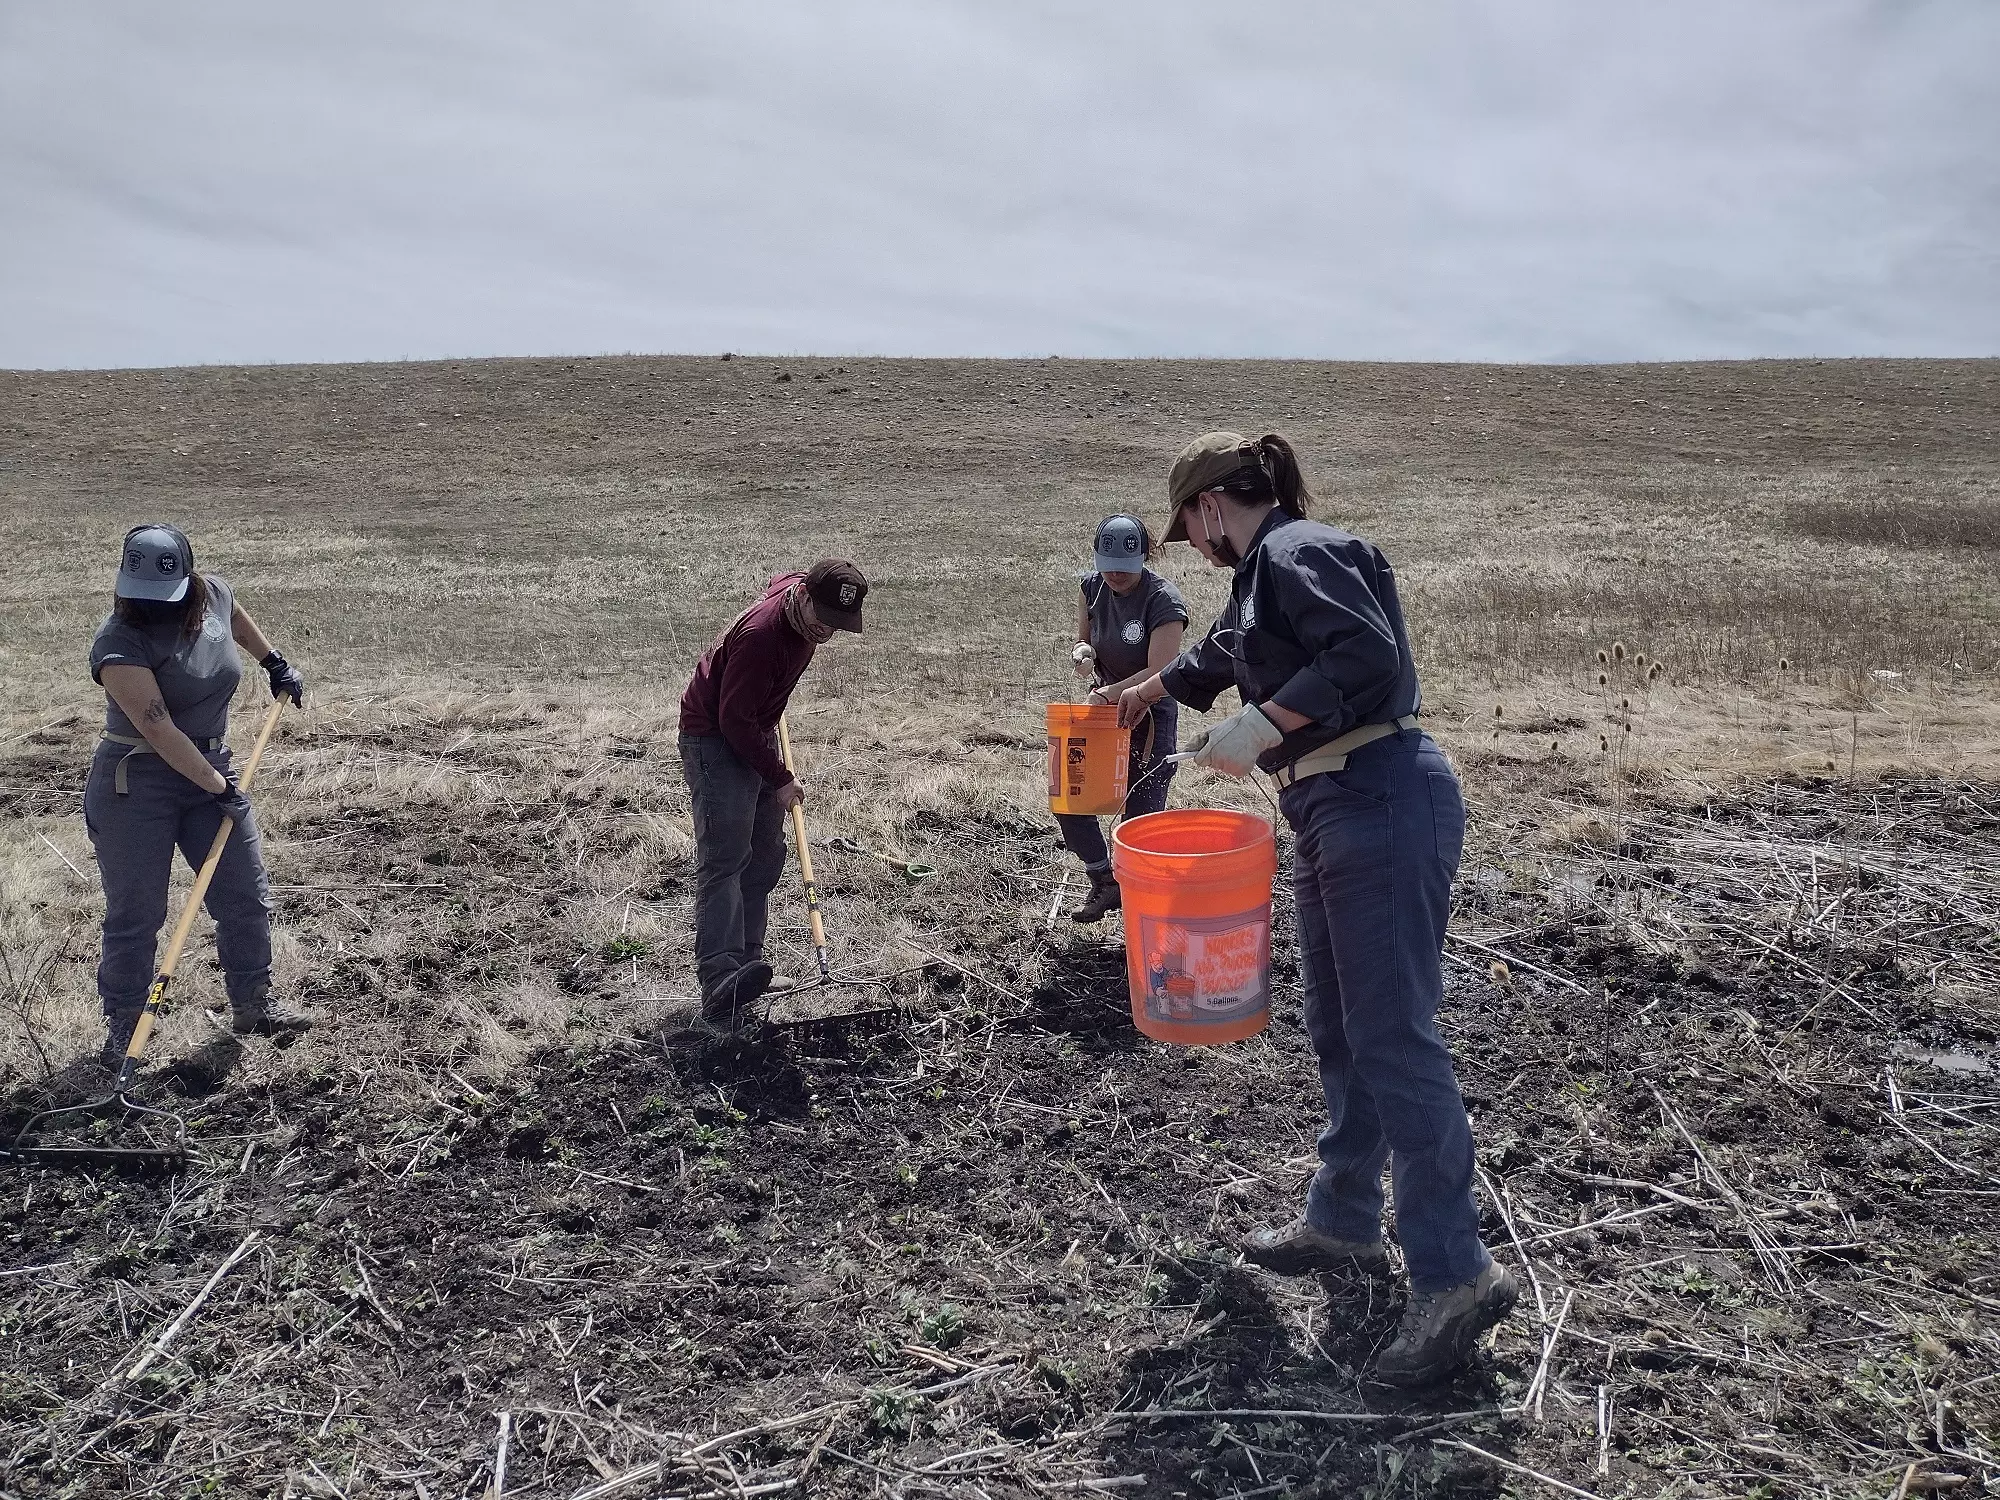 A crew of four people planting native seeds in a field.